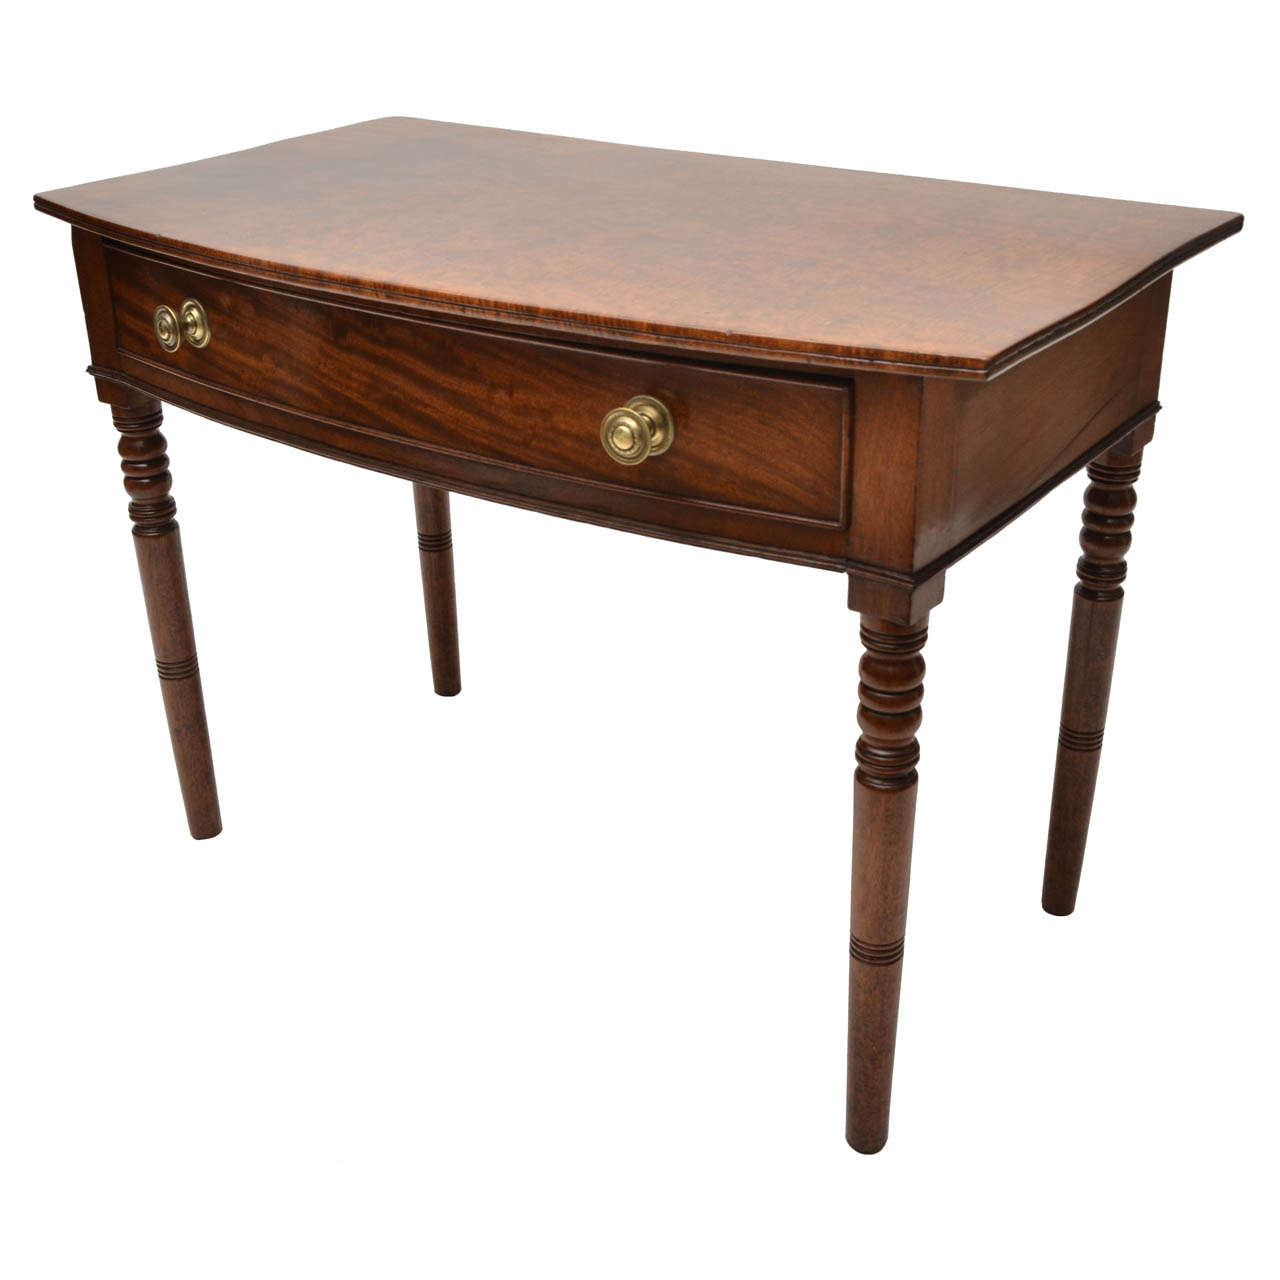 Early 19th Century Regency Mahogany Bow Front Side Table For Sale